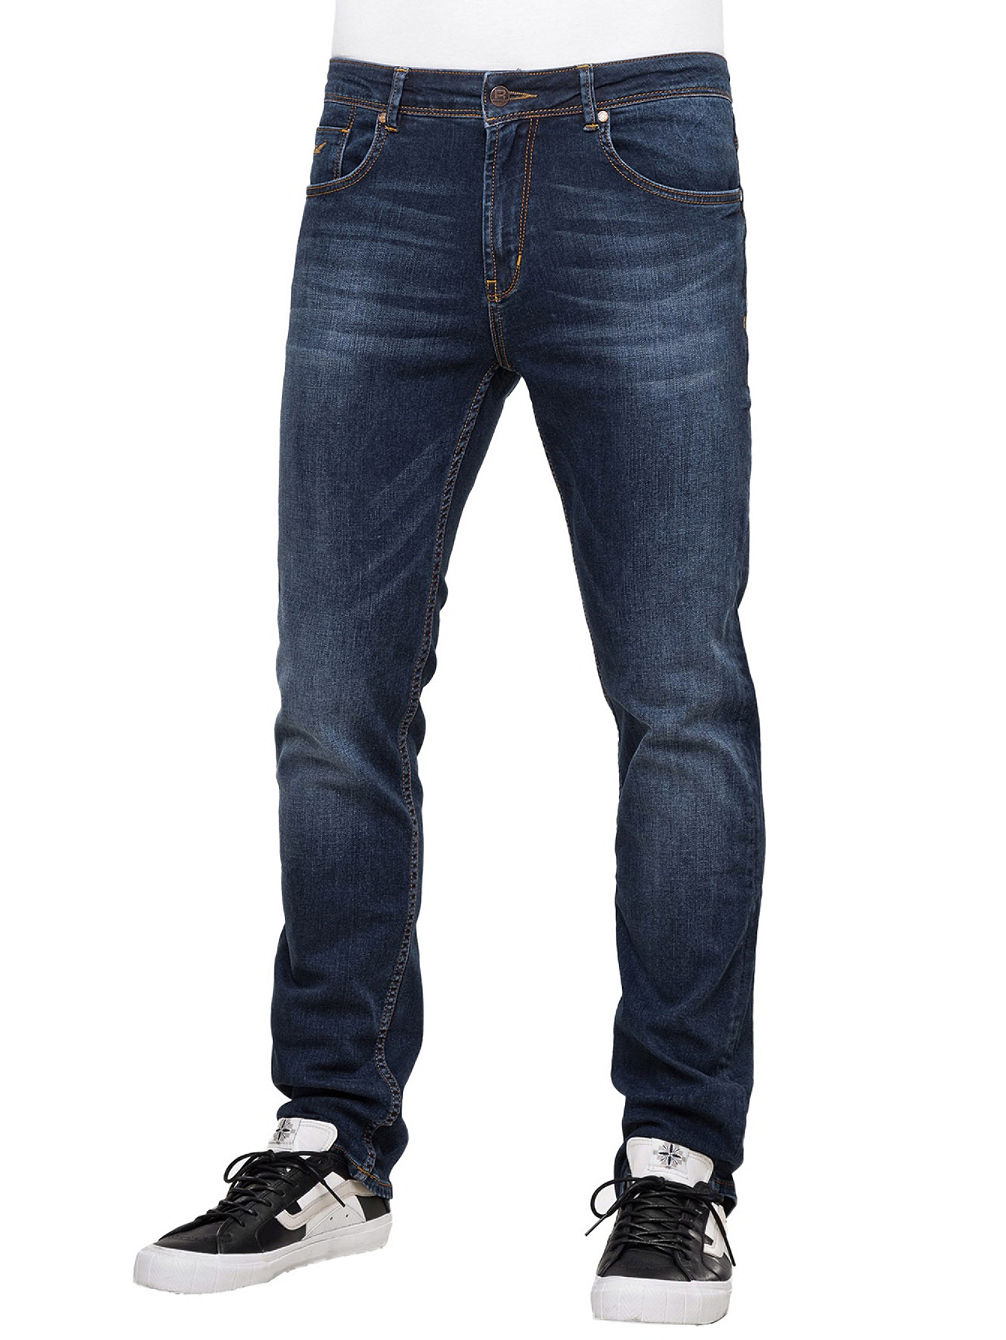 Buy REELL Trigger Jeans online at blue-tomato.com